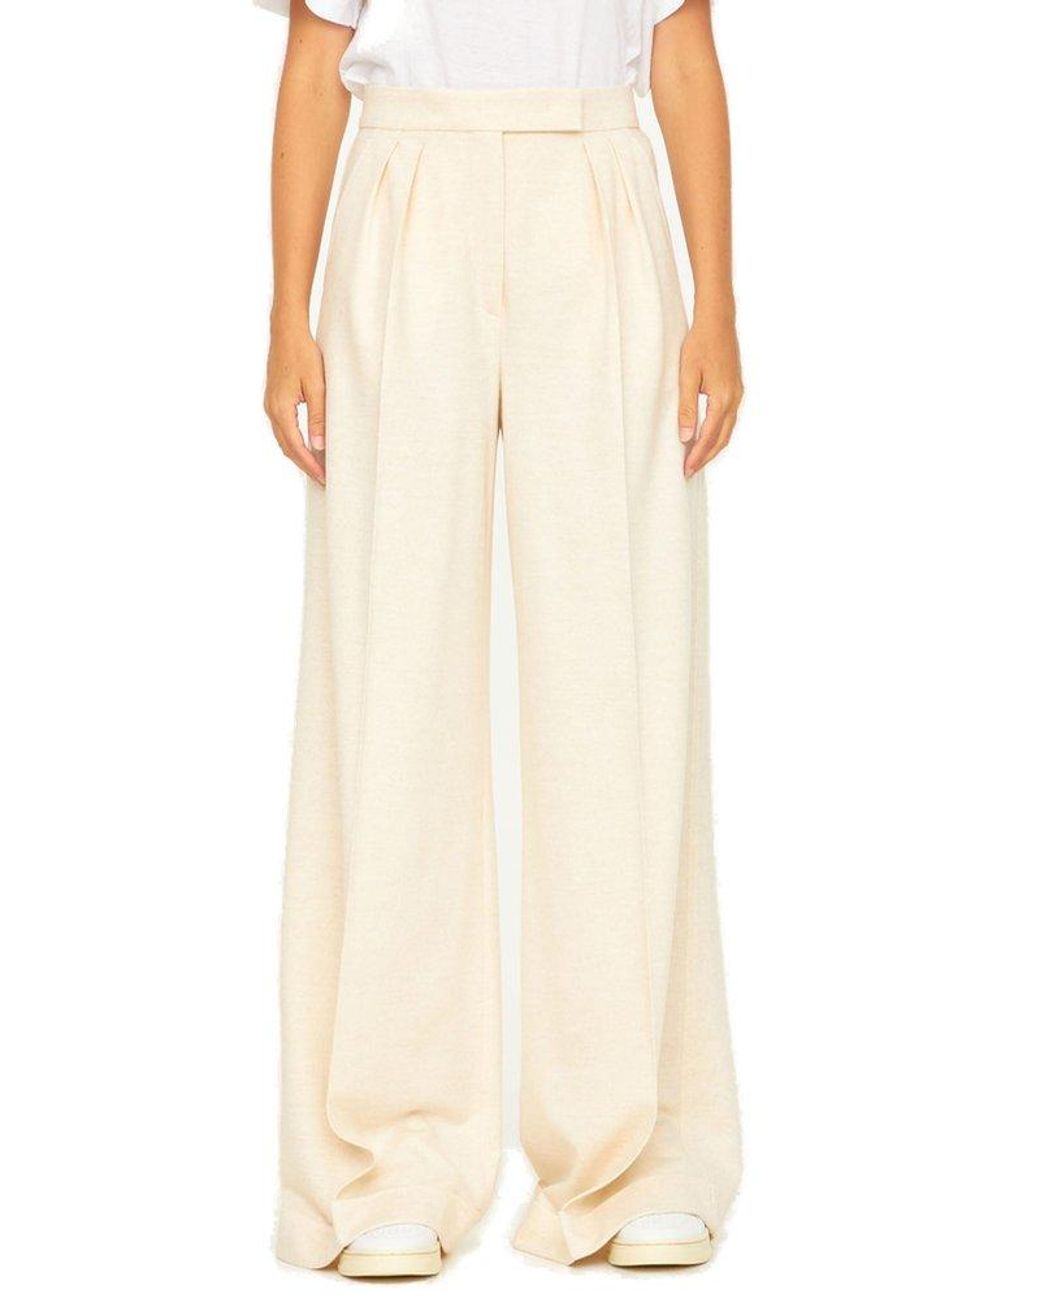 Slacks and Chinos Straight-leg trousers Womens Clothing Trousers Max Mara Cotton Pants in White 